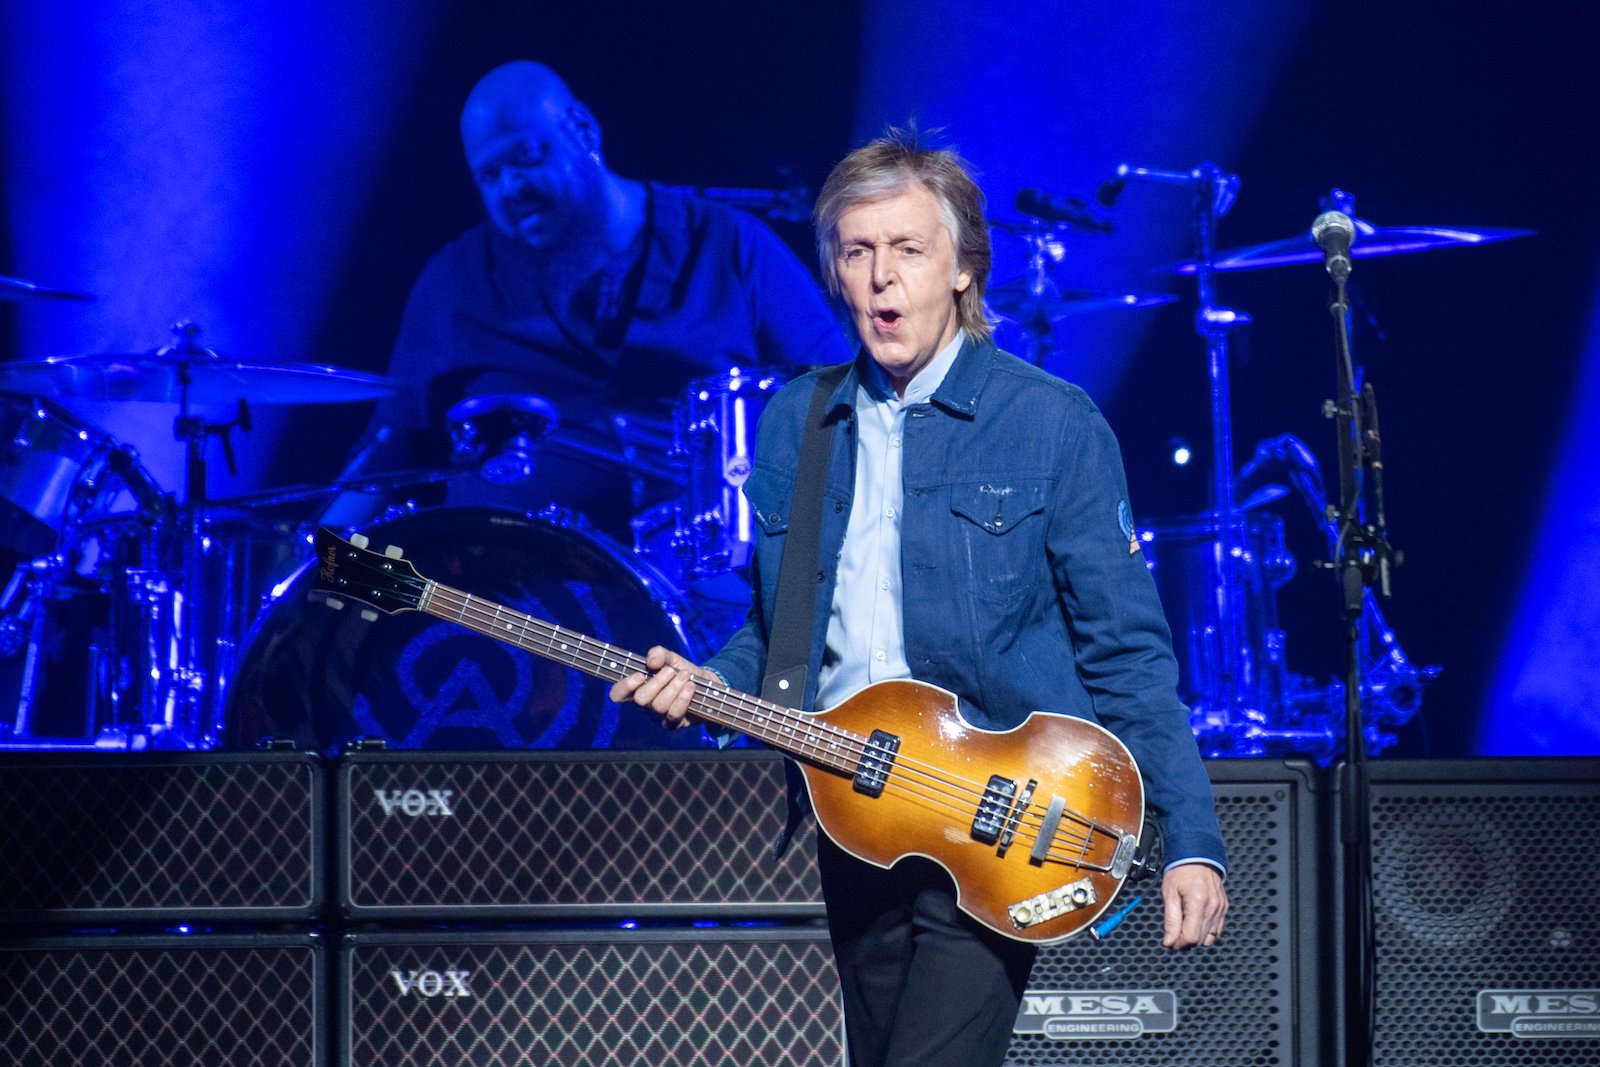 Paul McCartney performs on stage at the SSE Hydro in Glasgow, Scotland